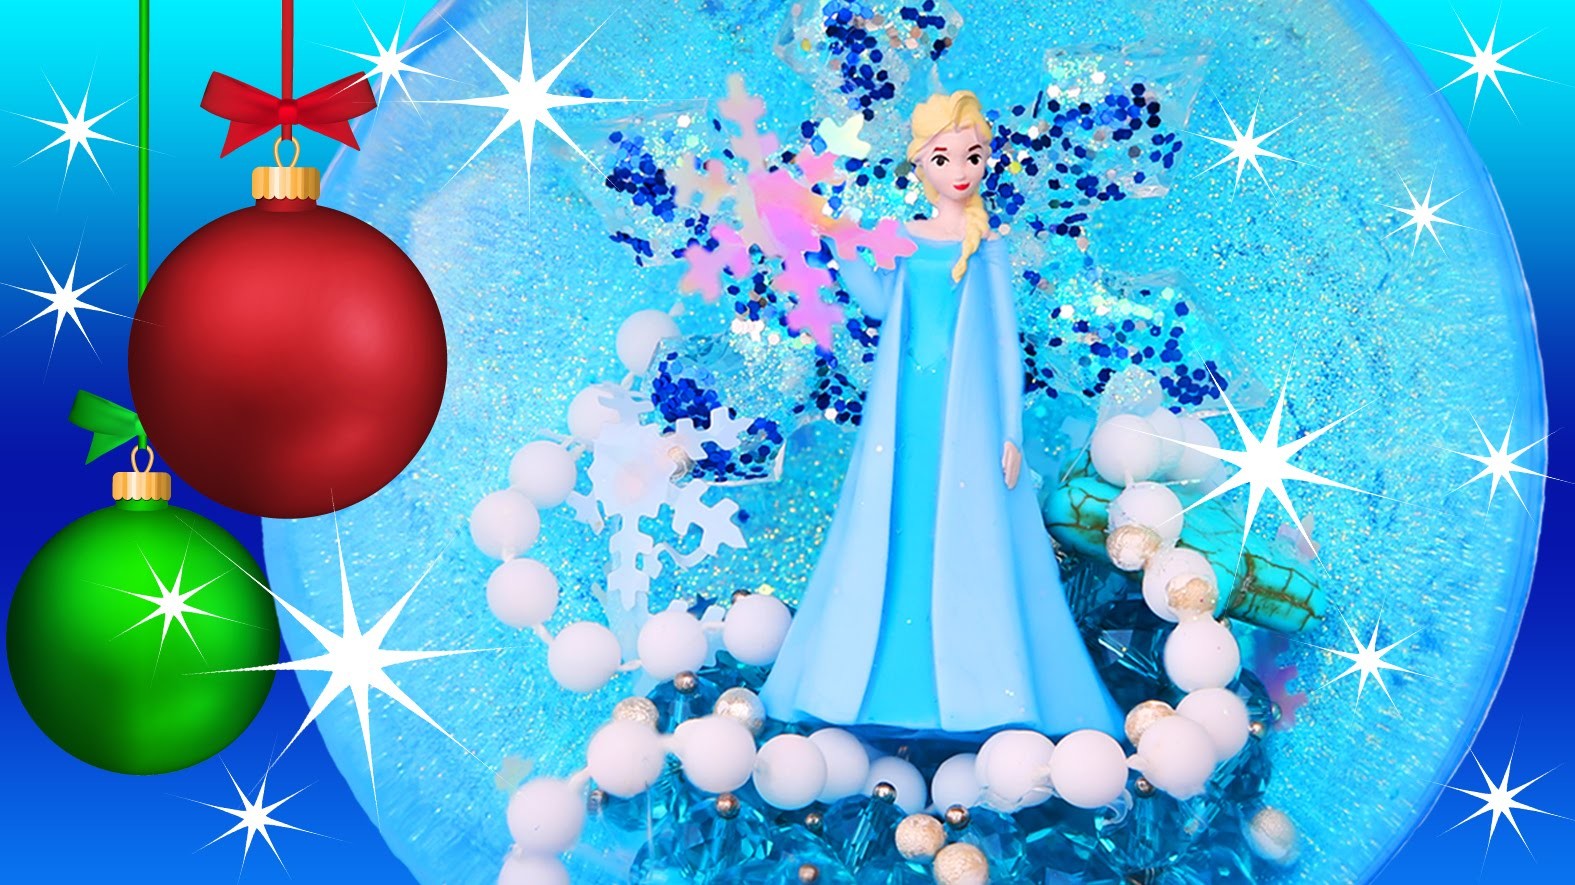 FROZEN ELSA CHRISTMAS BAUBLE ORNAMENT Make Your Own How To Decoration